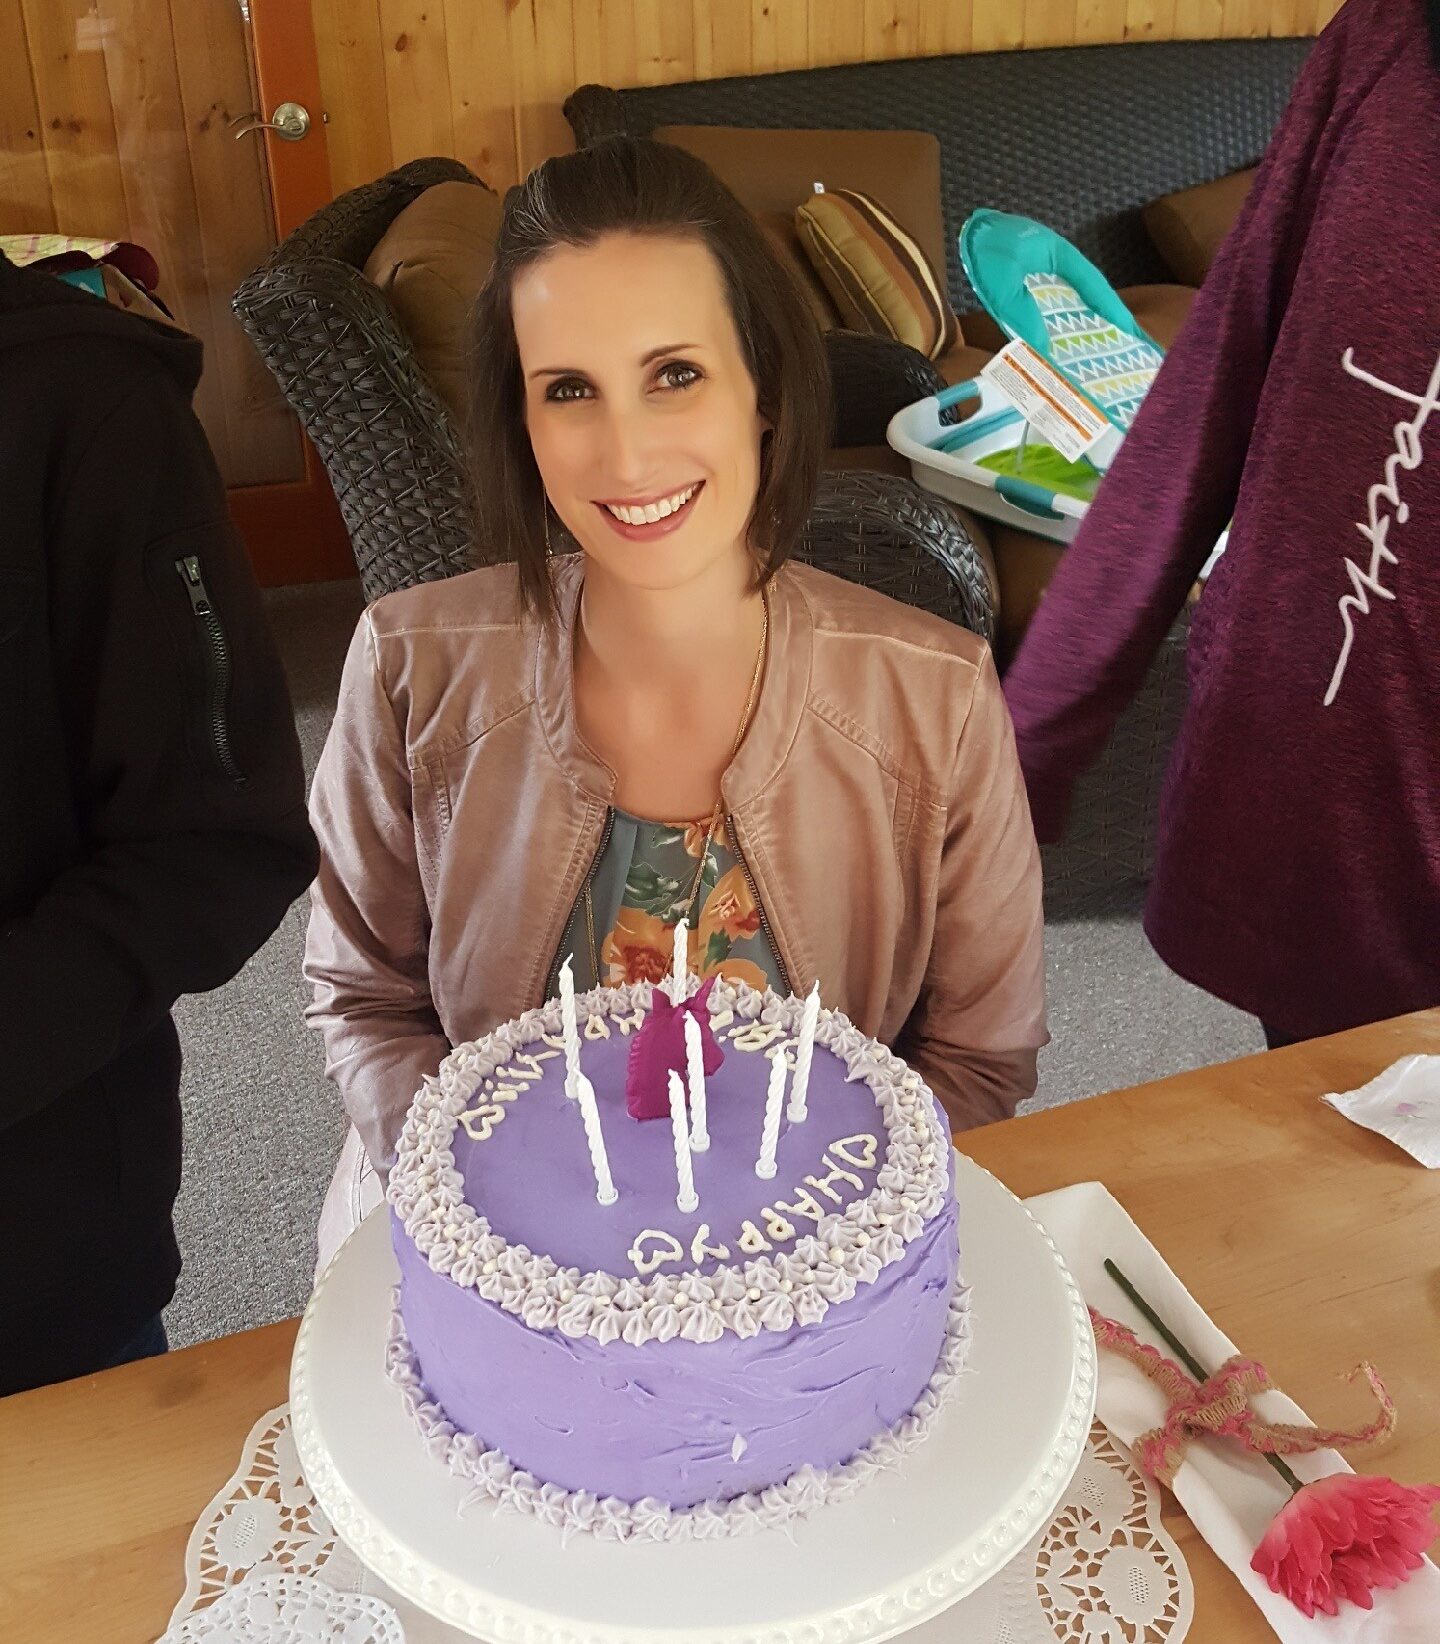 woman with short dark brown hair smiling in front of a purple birthday cake